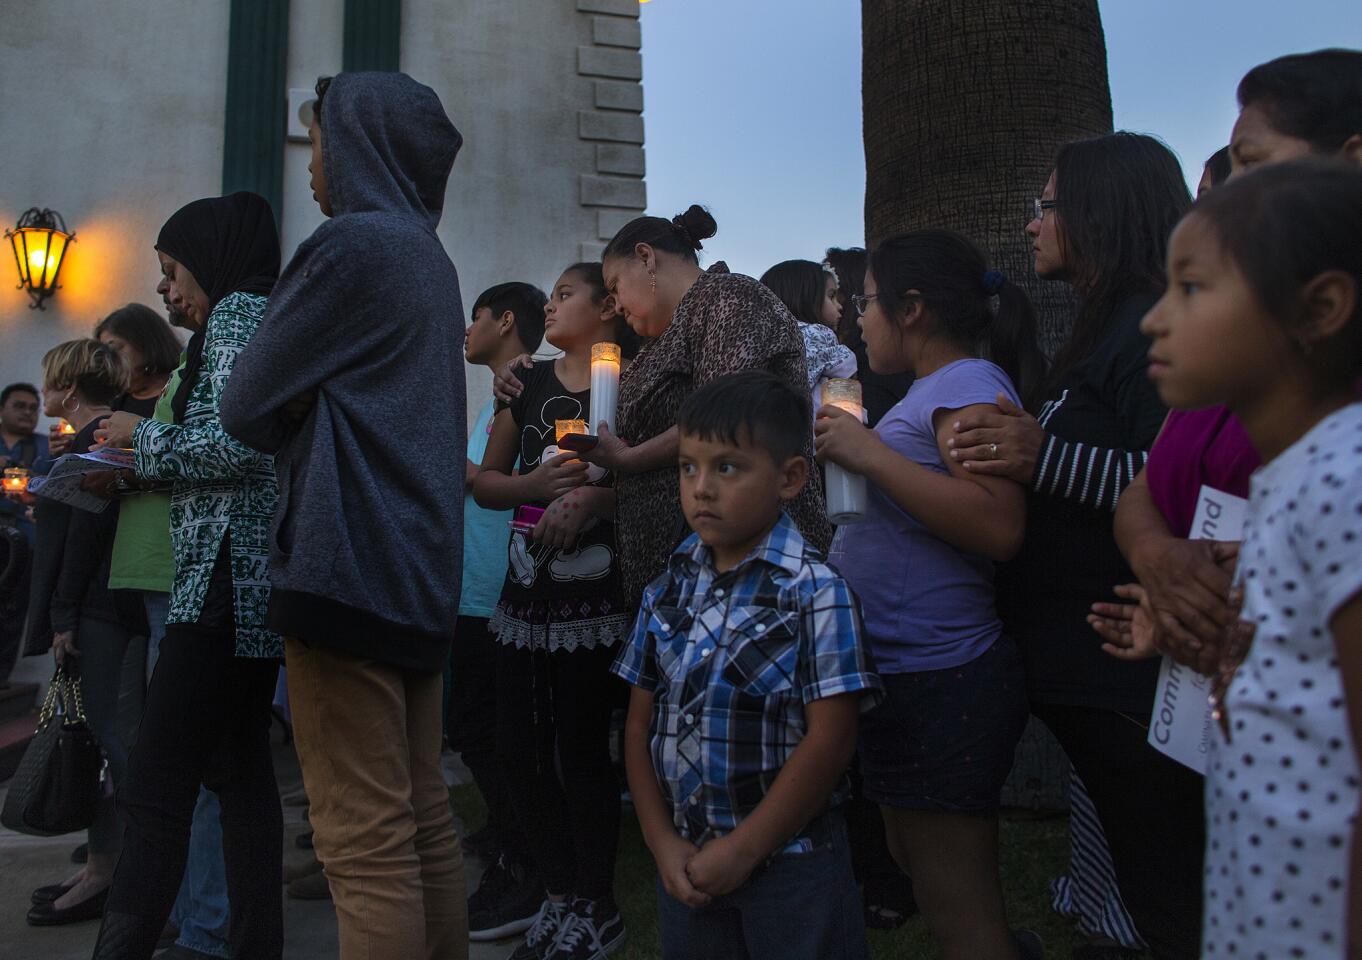 Residents hold a prayer vigil outside Our Lady of Assumption Catholic Church for the victims in the